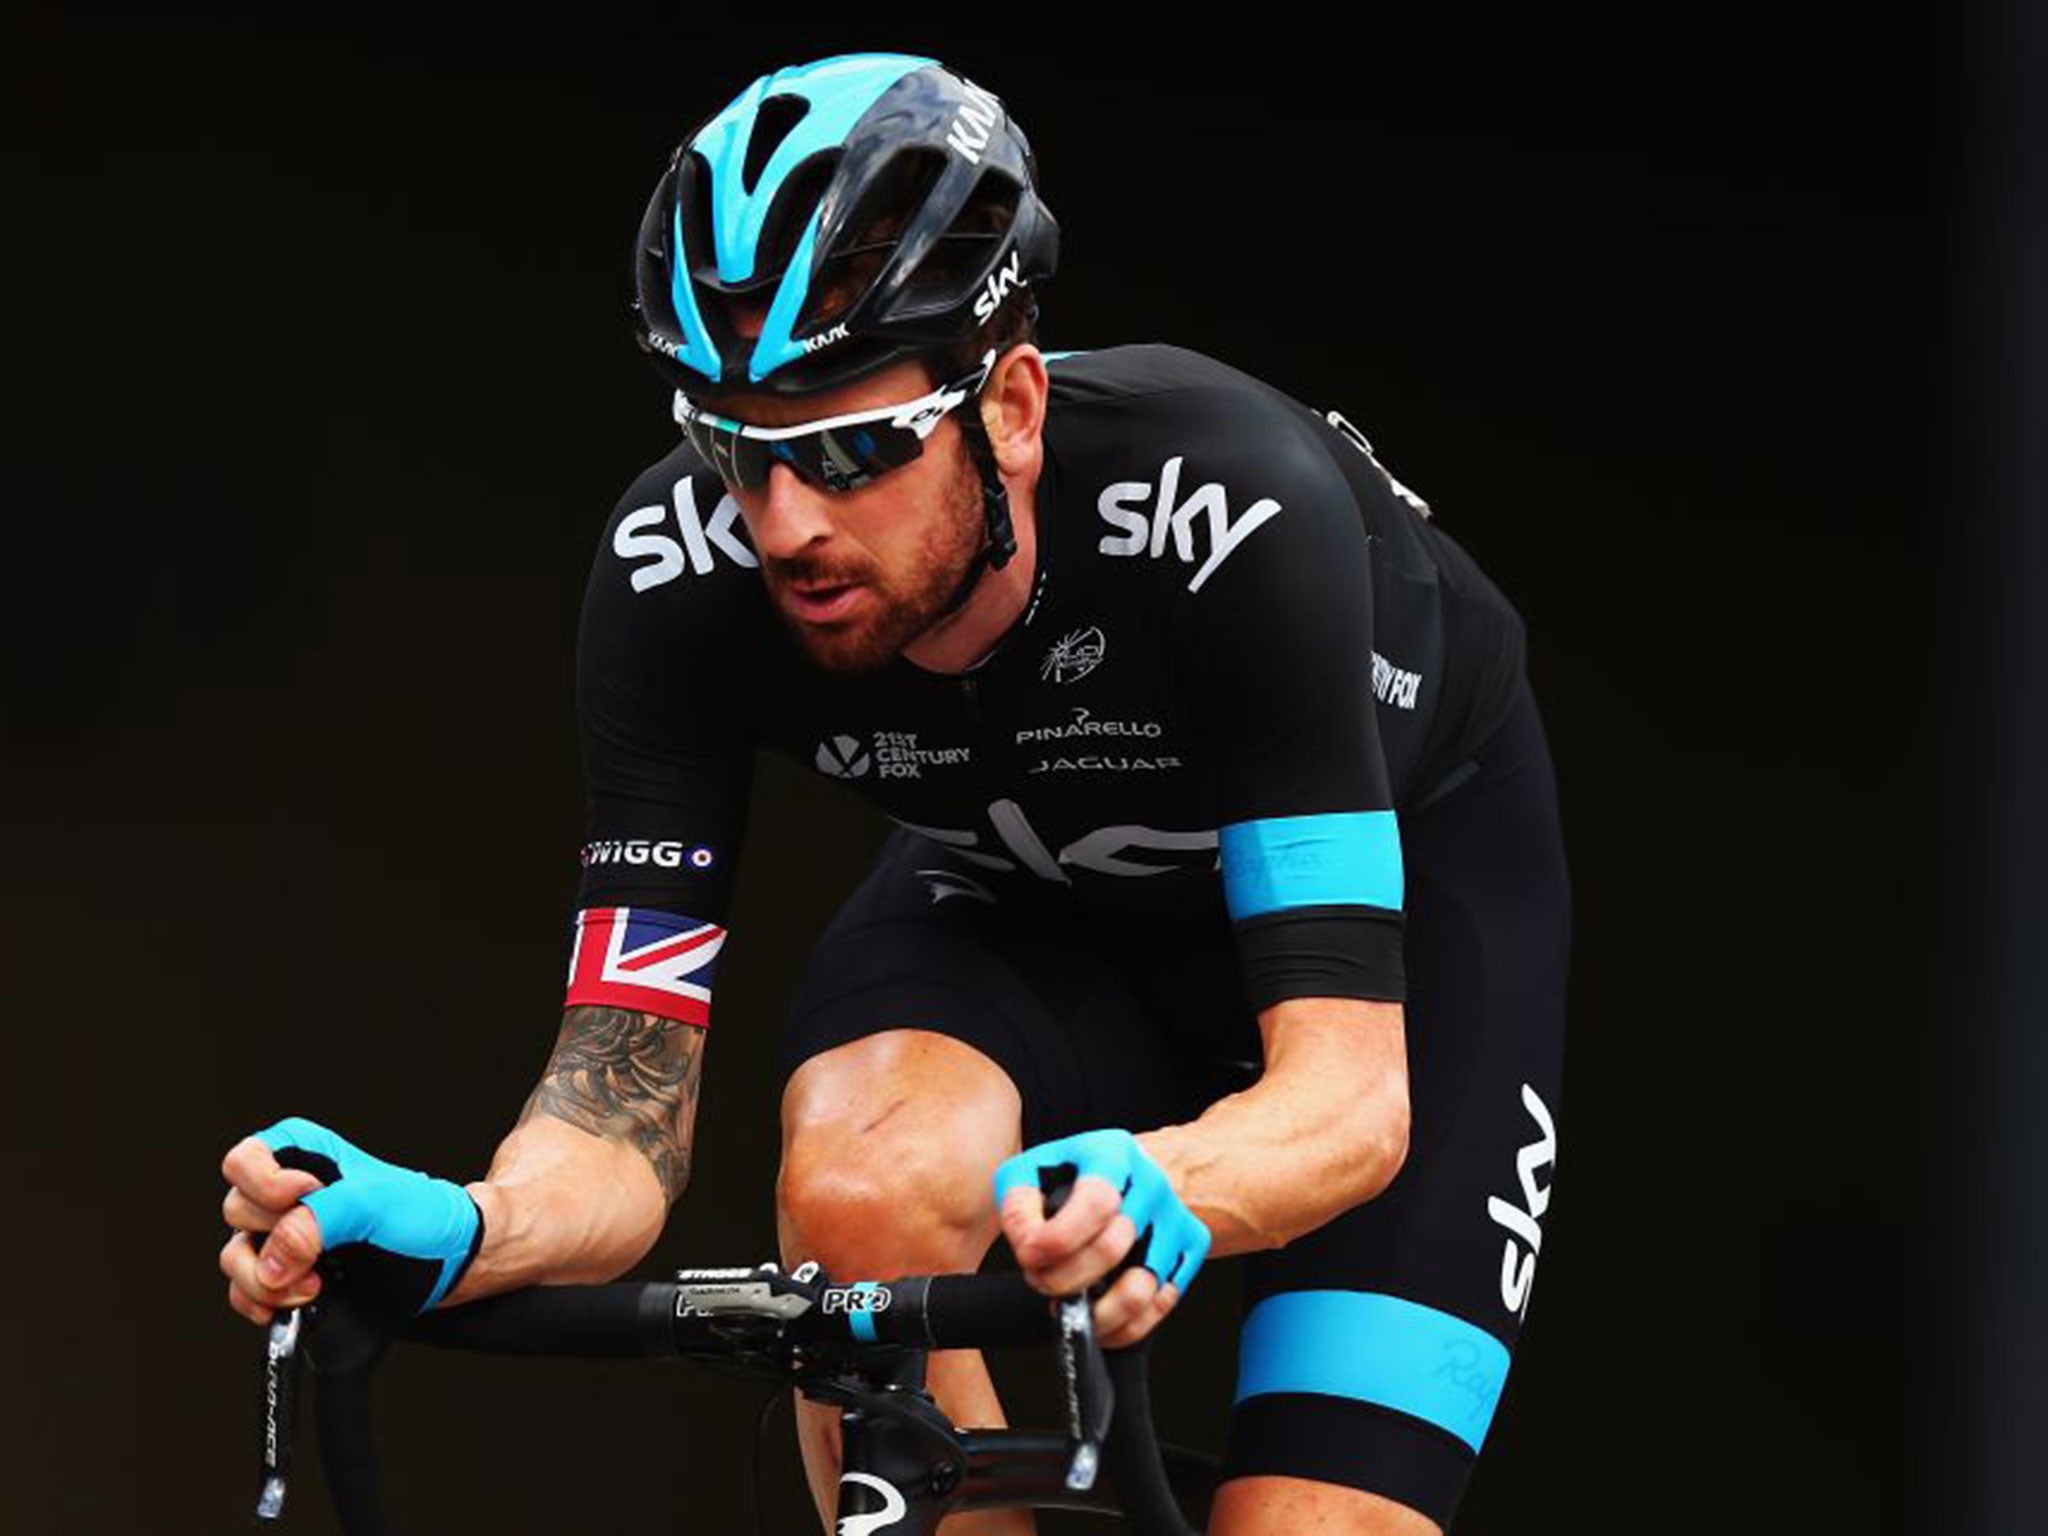 Sir Bradley Wiggins was victorious in the final day's time-trial of last week's Tour of Britain